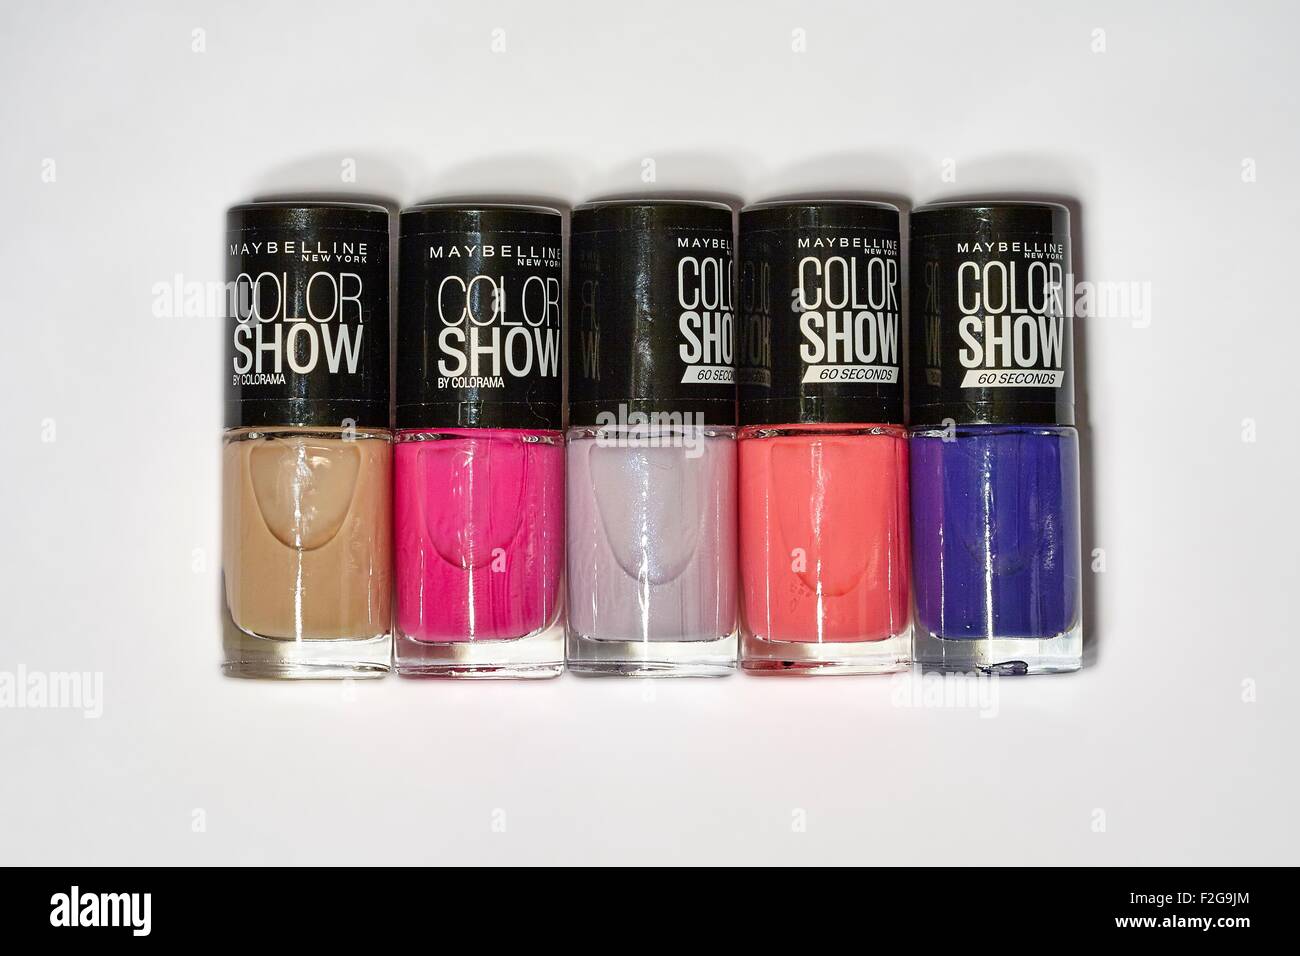 Maybelline Color Show Nail Lacquer Nude Skin 015 Review | Diva Likes